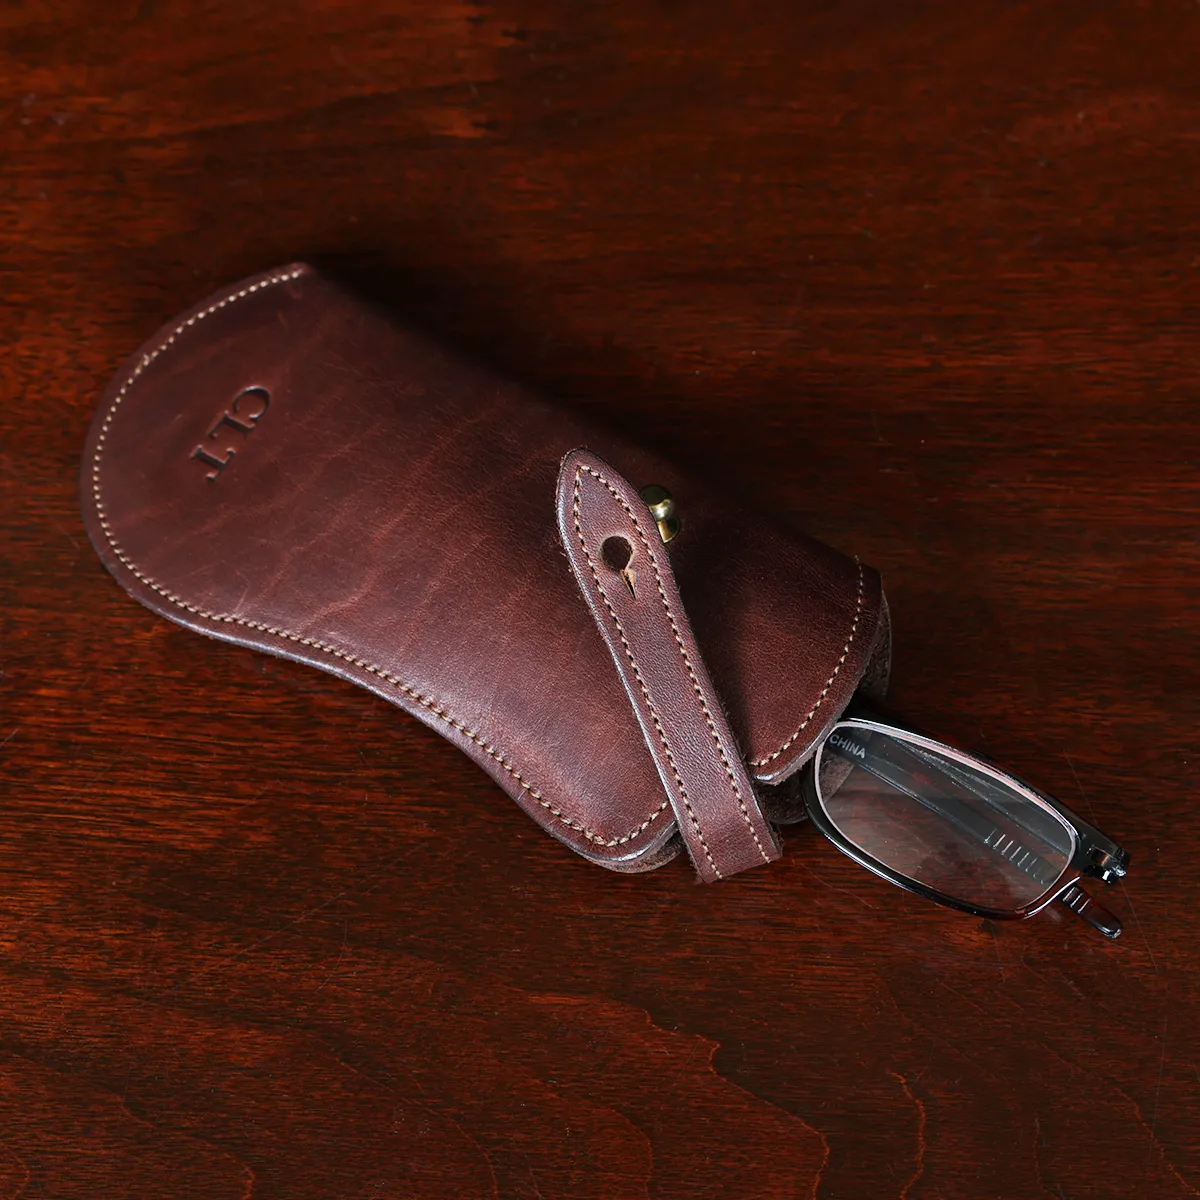 Brown leather No. 2 Eyeglass Case on top of a wooden table with a dark background open with glasses